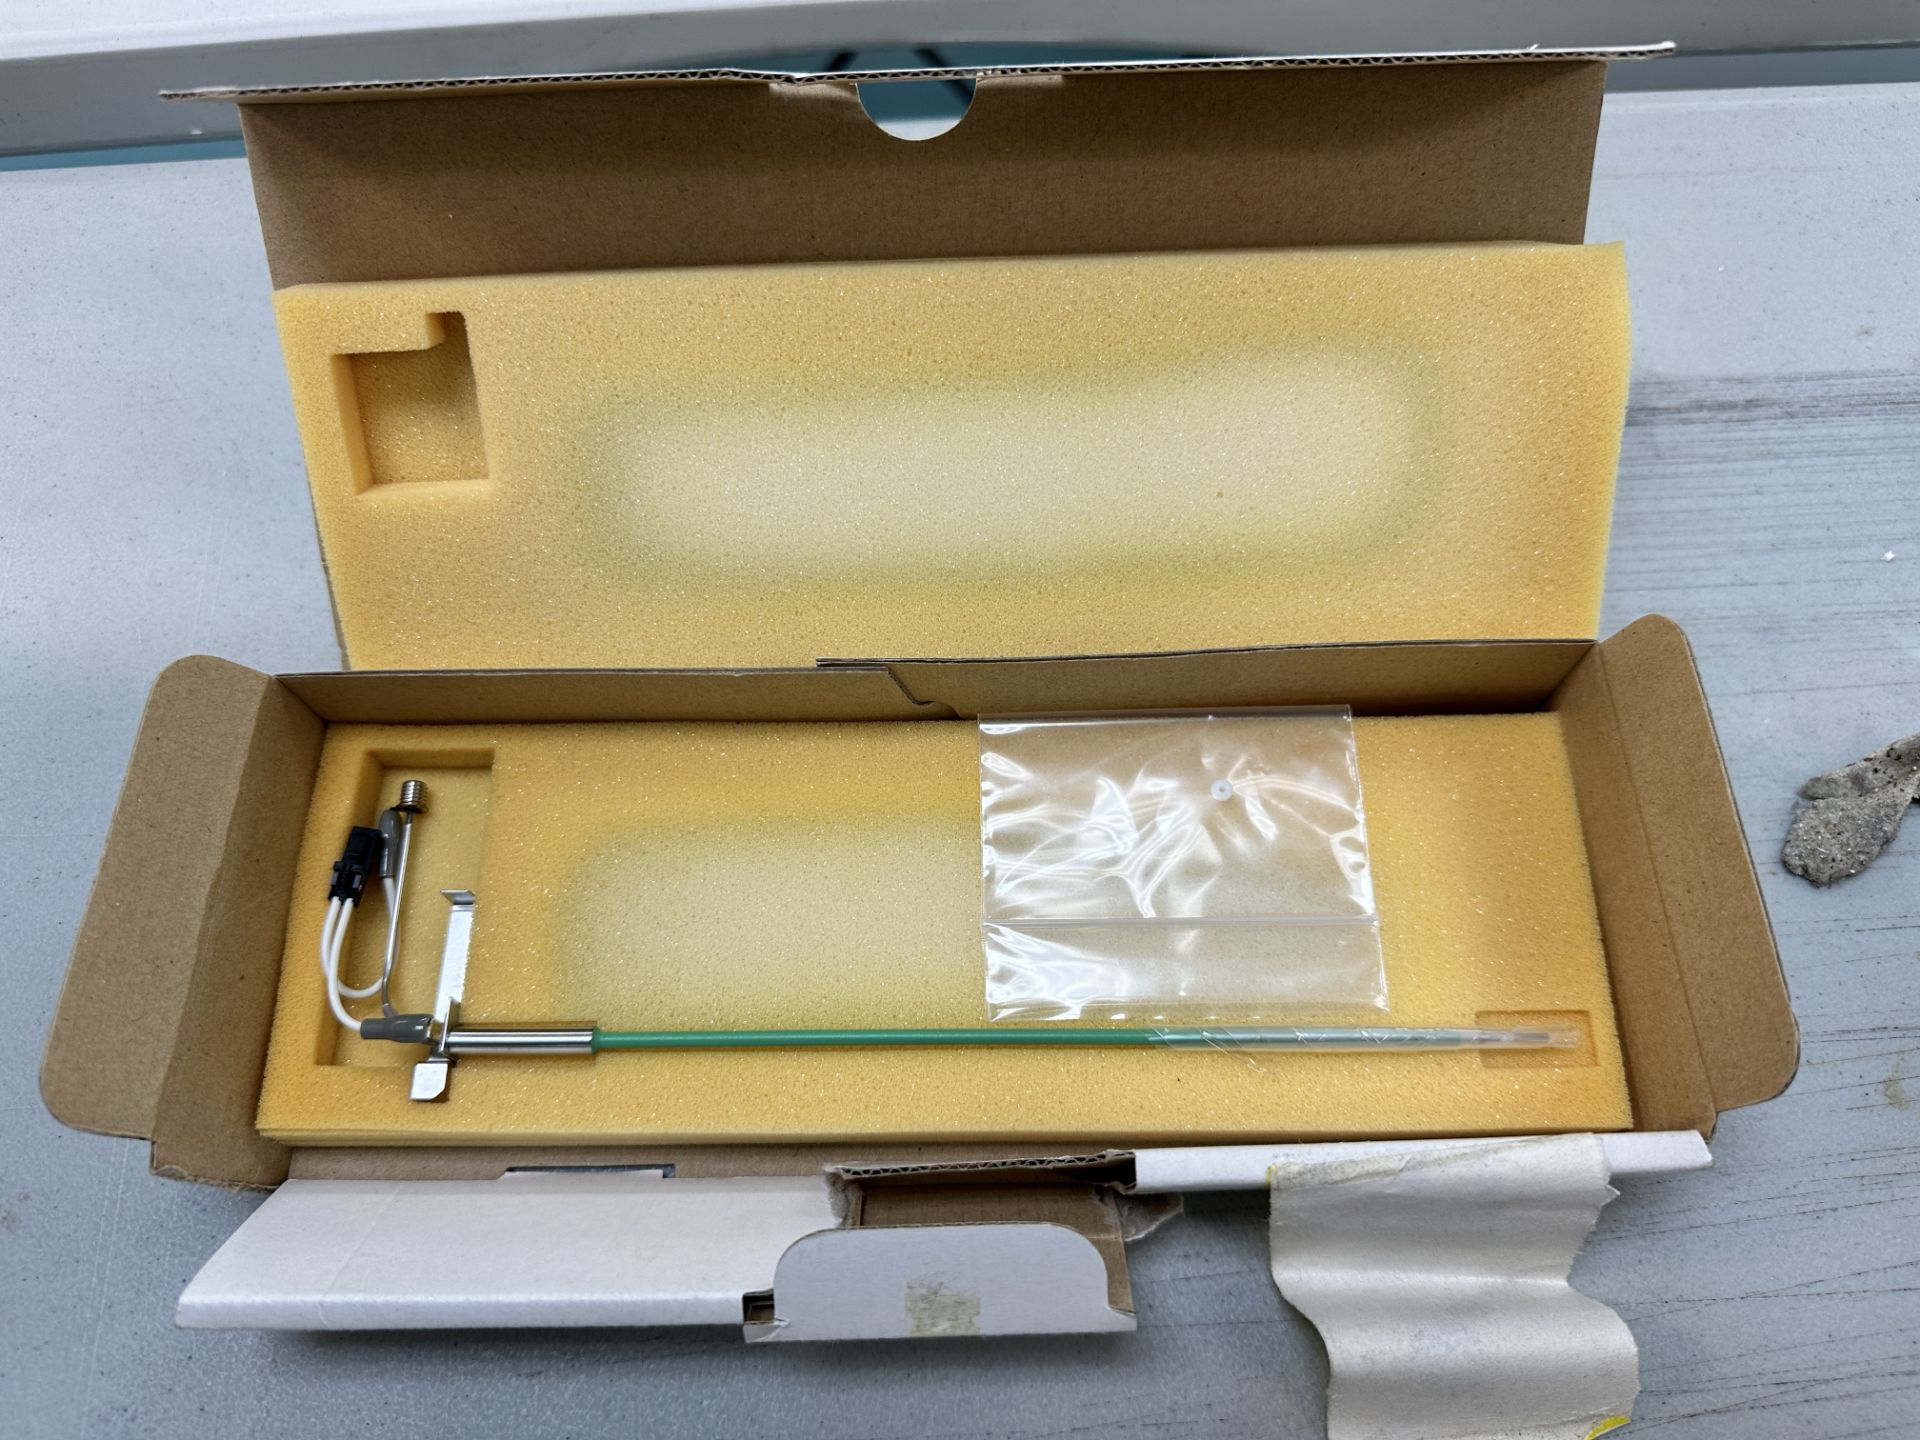 (OBN) Roche ISE Probe for Cobas C501 PN: 04814053001